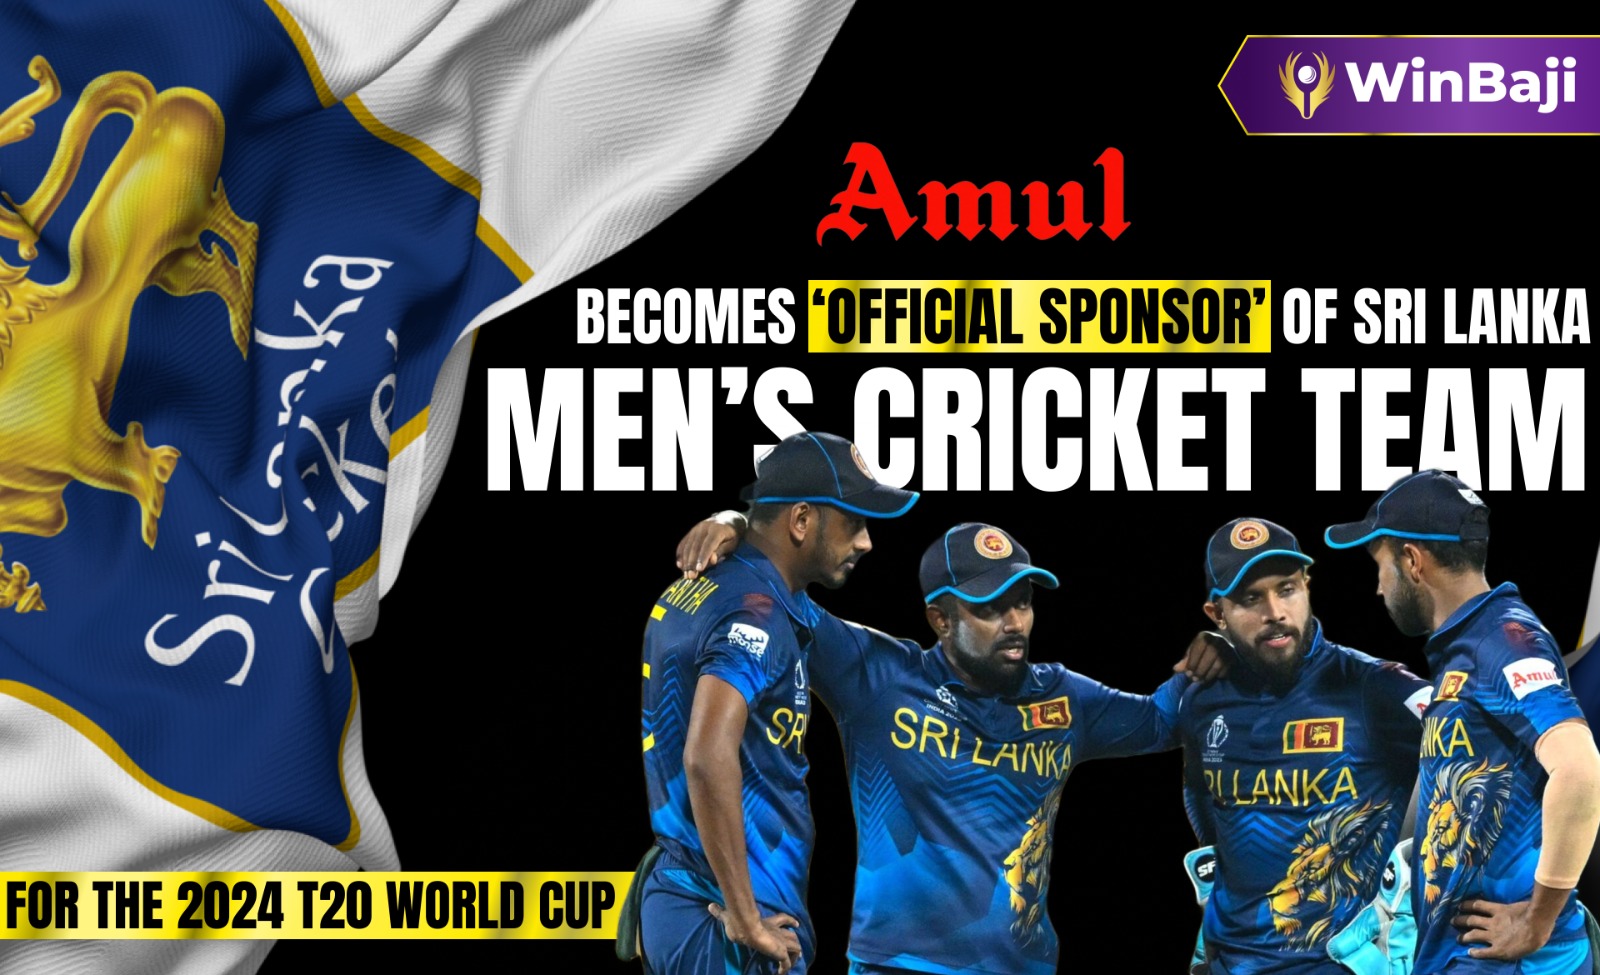 Amul Becomes ‘Official Sponsor’ of Sri Lanka Men’s Cricket Team for the 2024 T20 World Cup